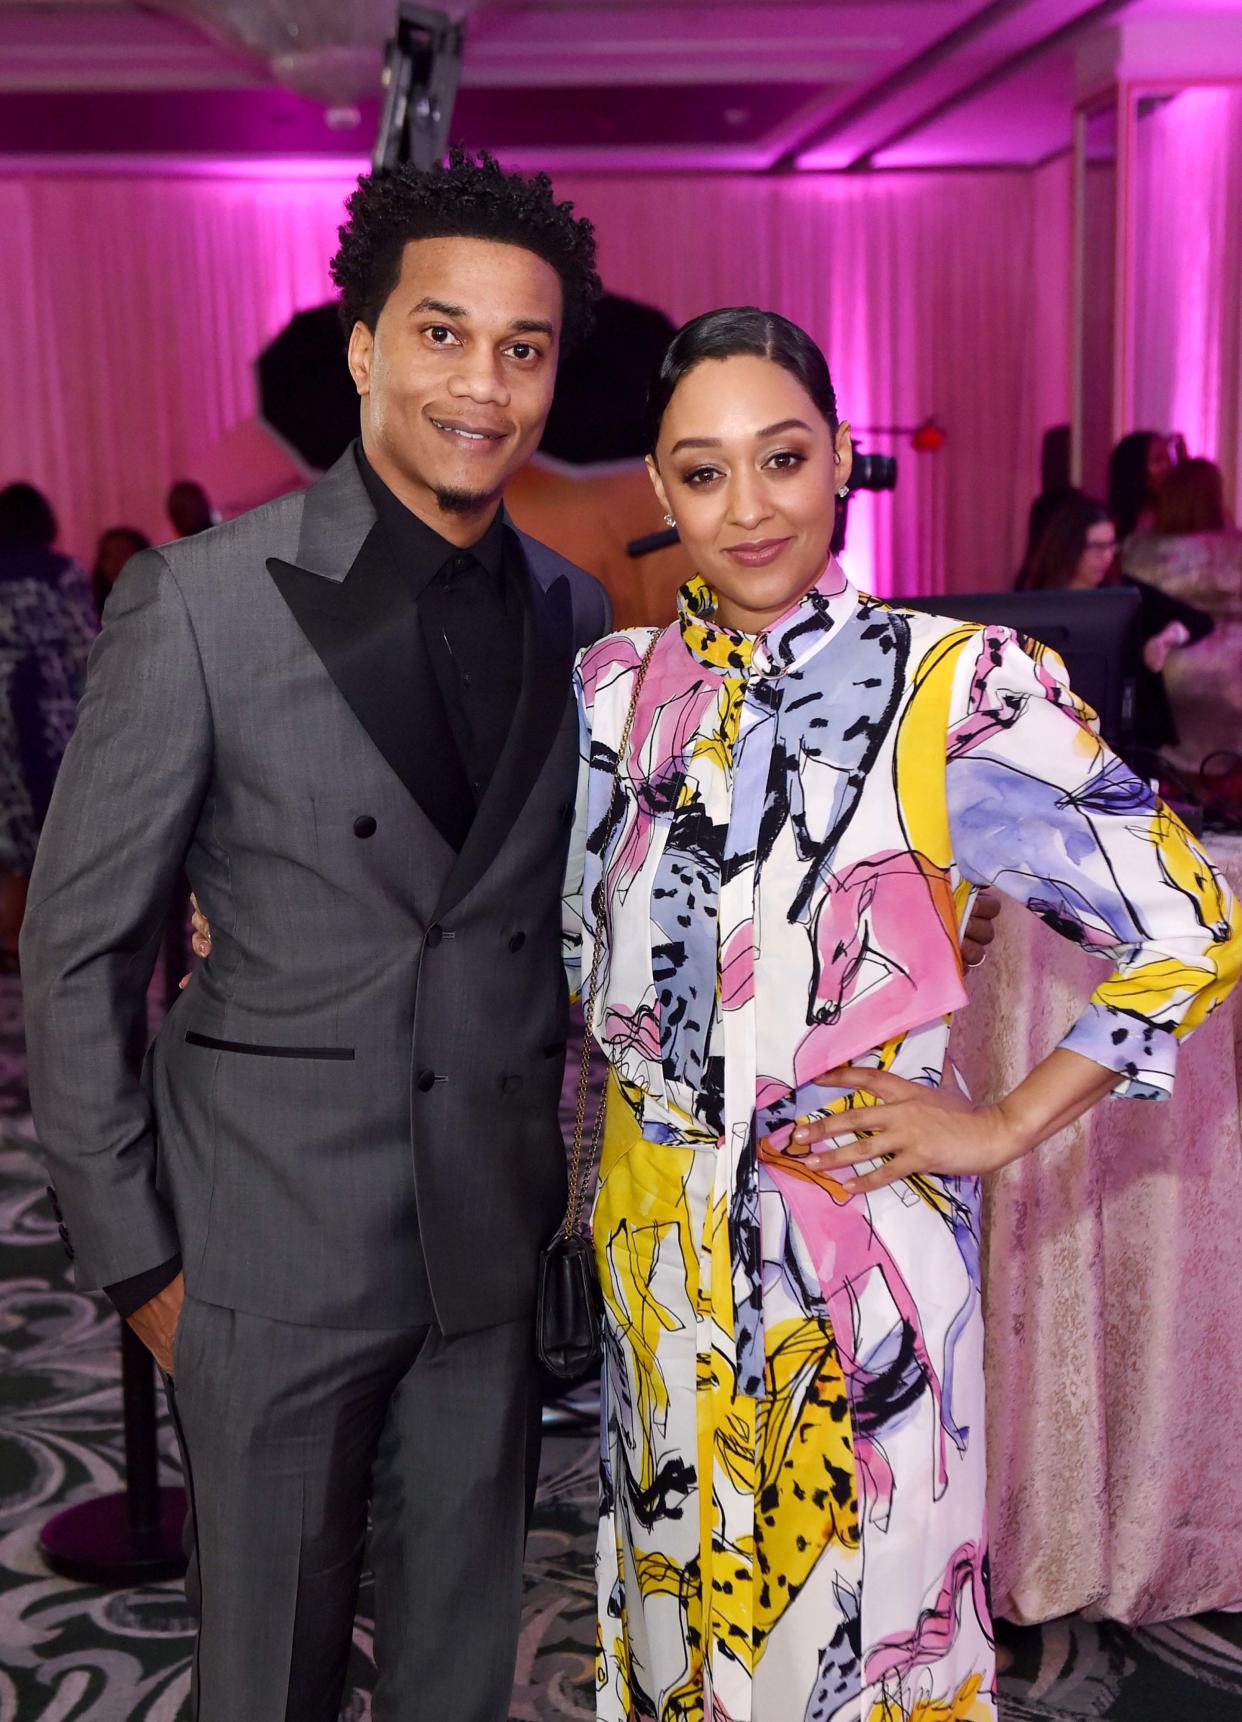 Cory Hardrict and Tia Mowry-Hardrict  (Aaron J. Thornton / Getty Images for ESSENCE)